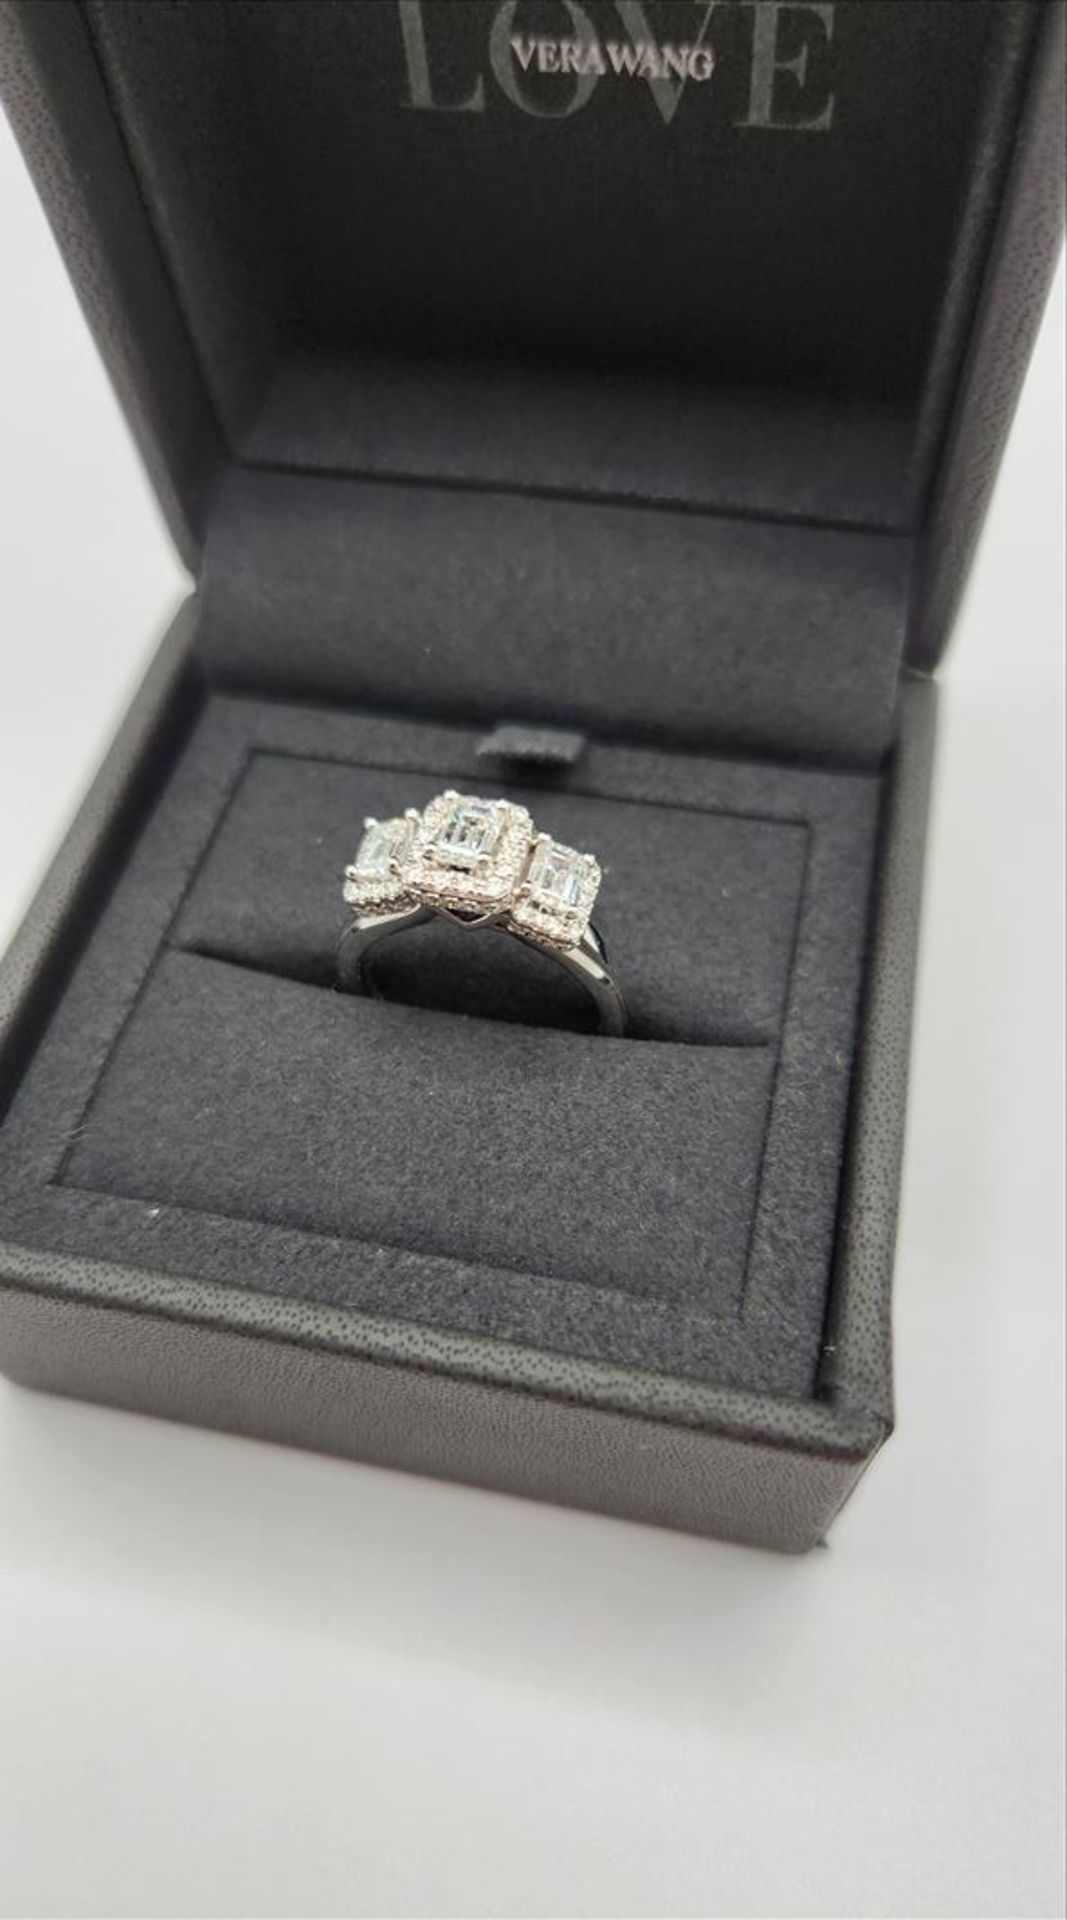 One lady’s stamped and tested 14kt VERA WANG LOVE collection diamond ring. Contained across the - Image 9 of 11